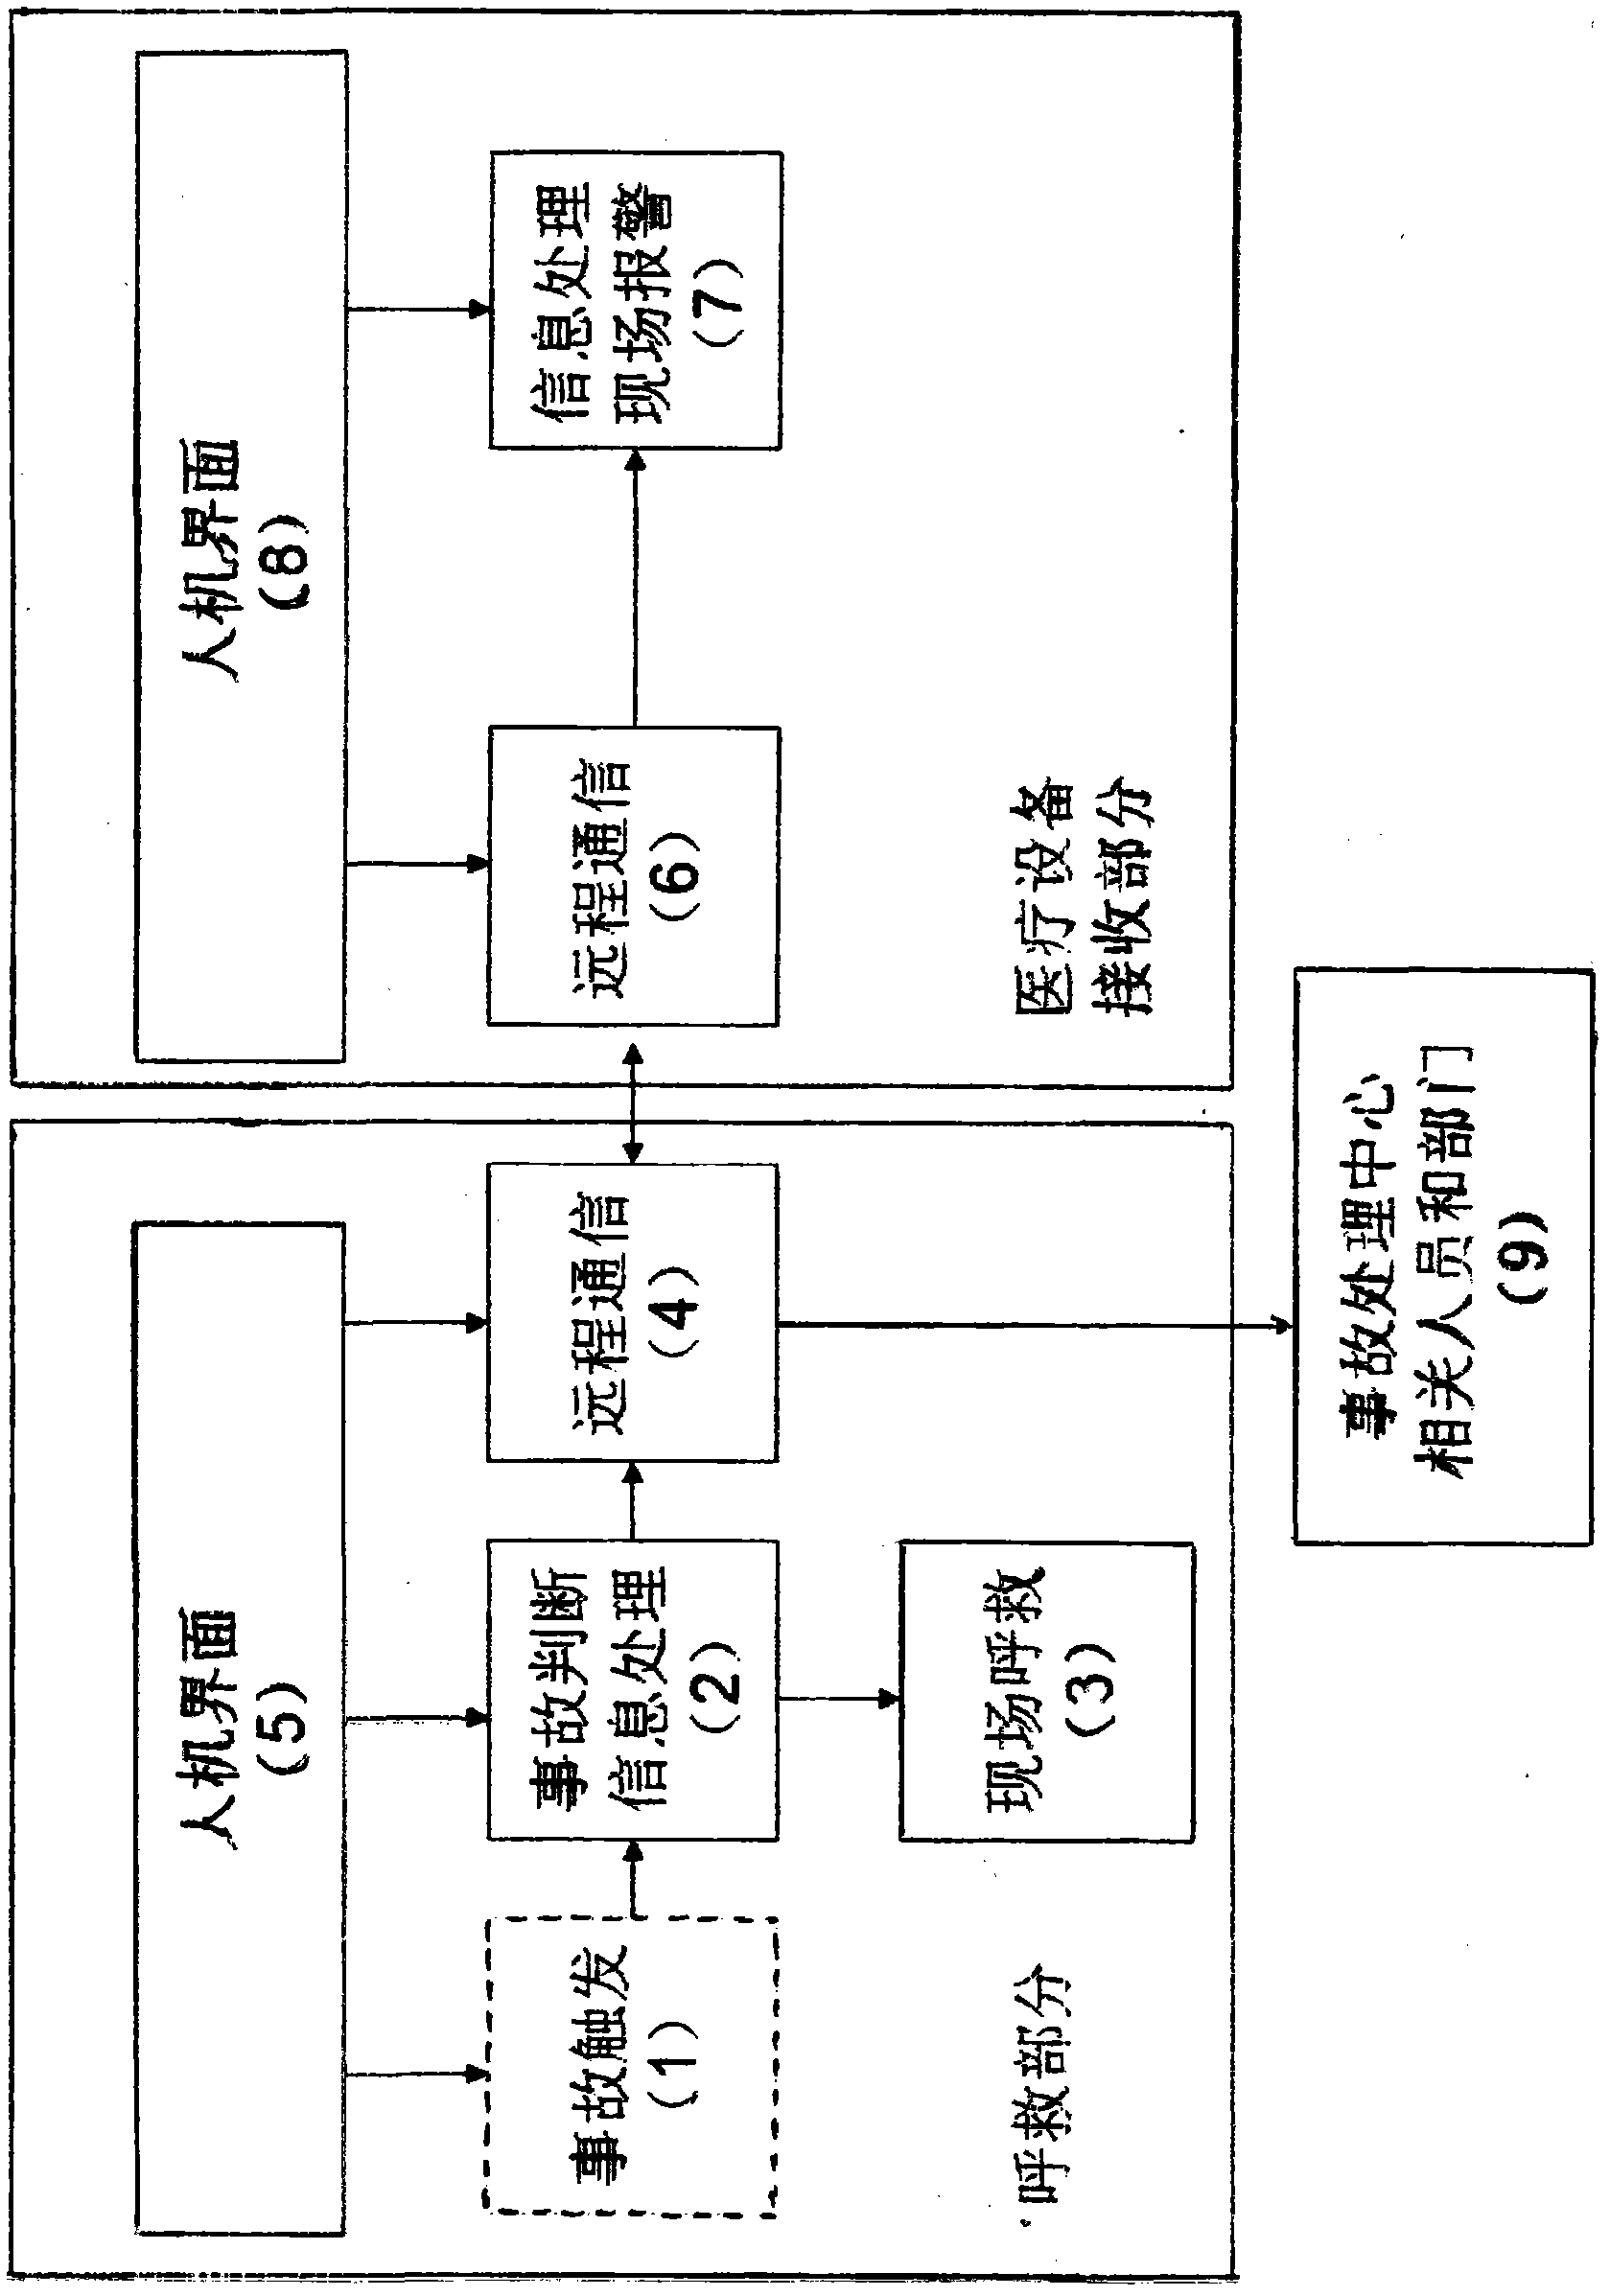 Medical emergency treatment method and system